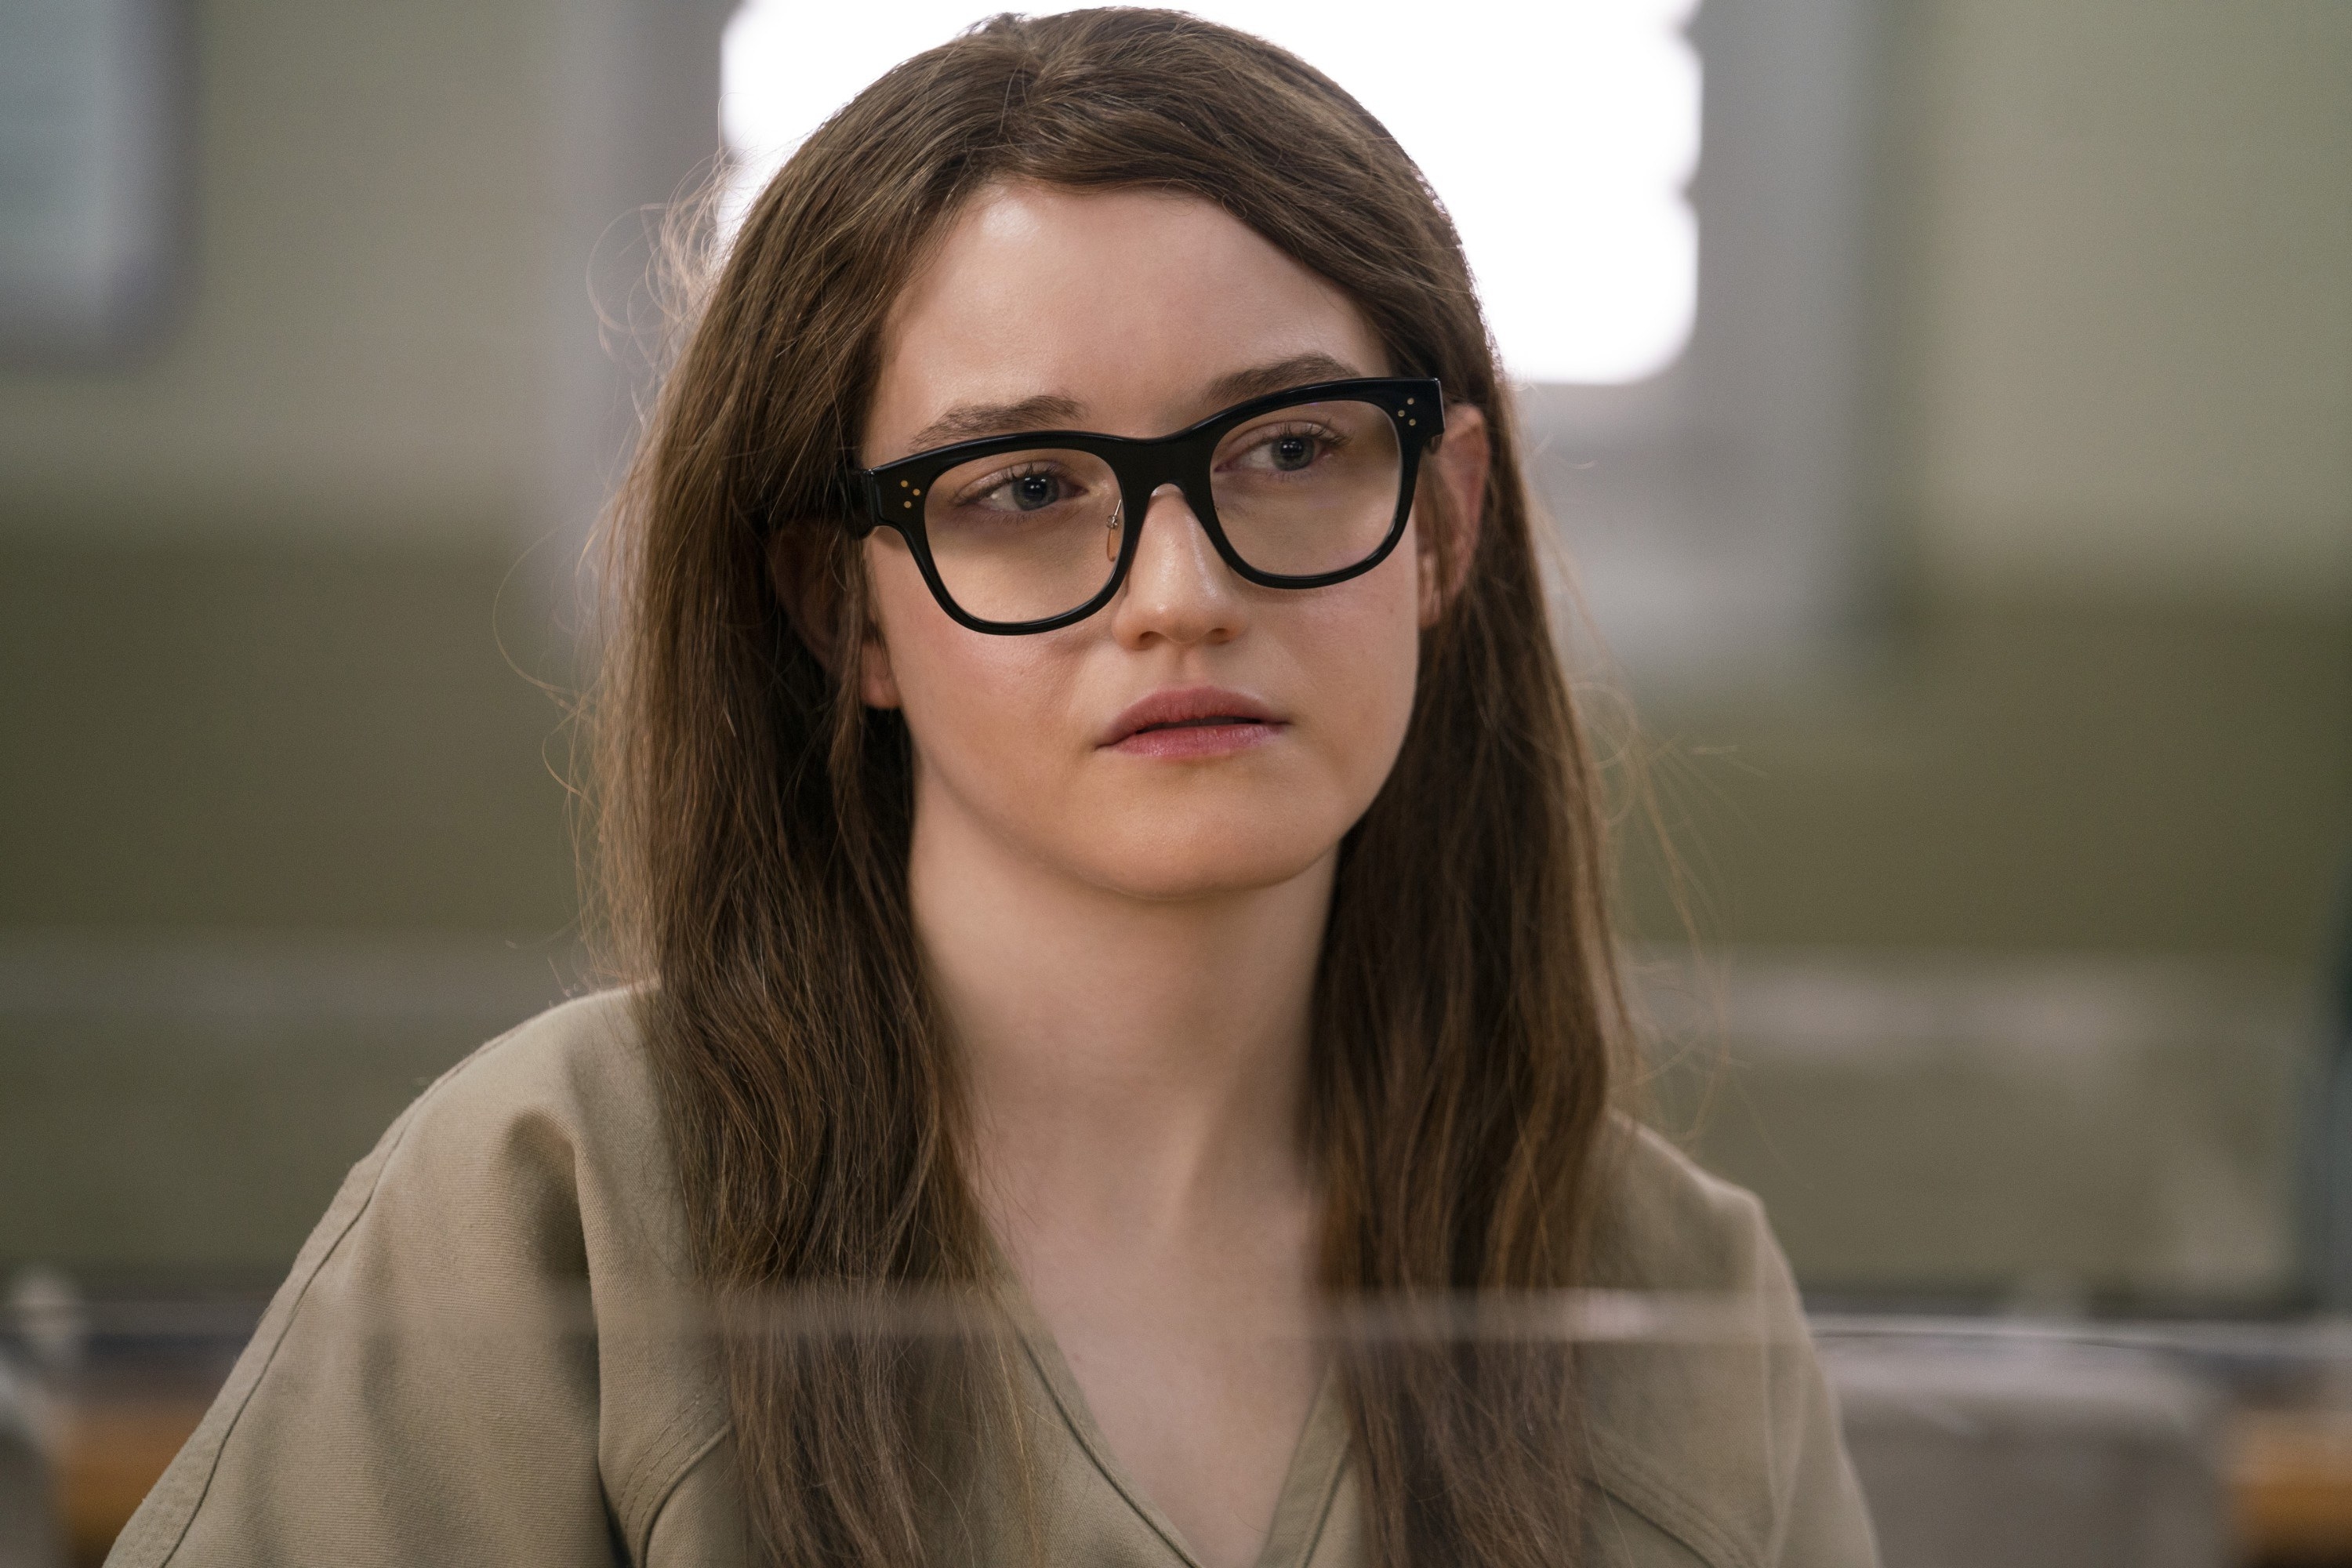 dressed in her prison uniform and thick glasses, Anna meets with Vivian in prison